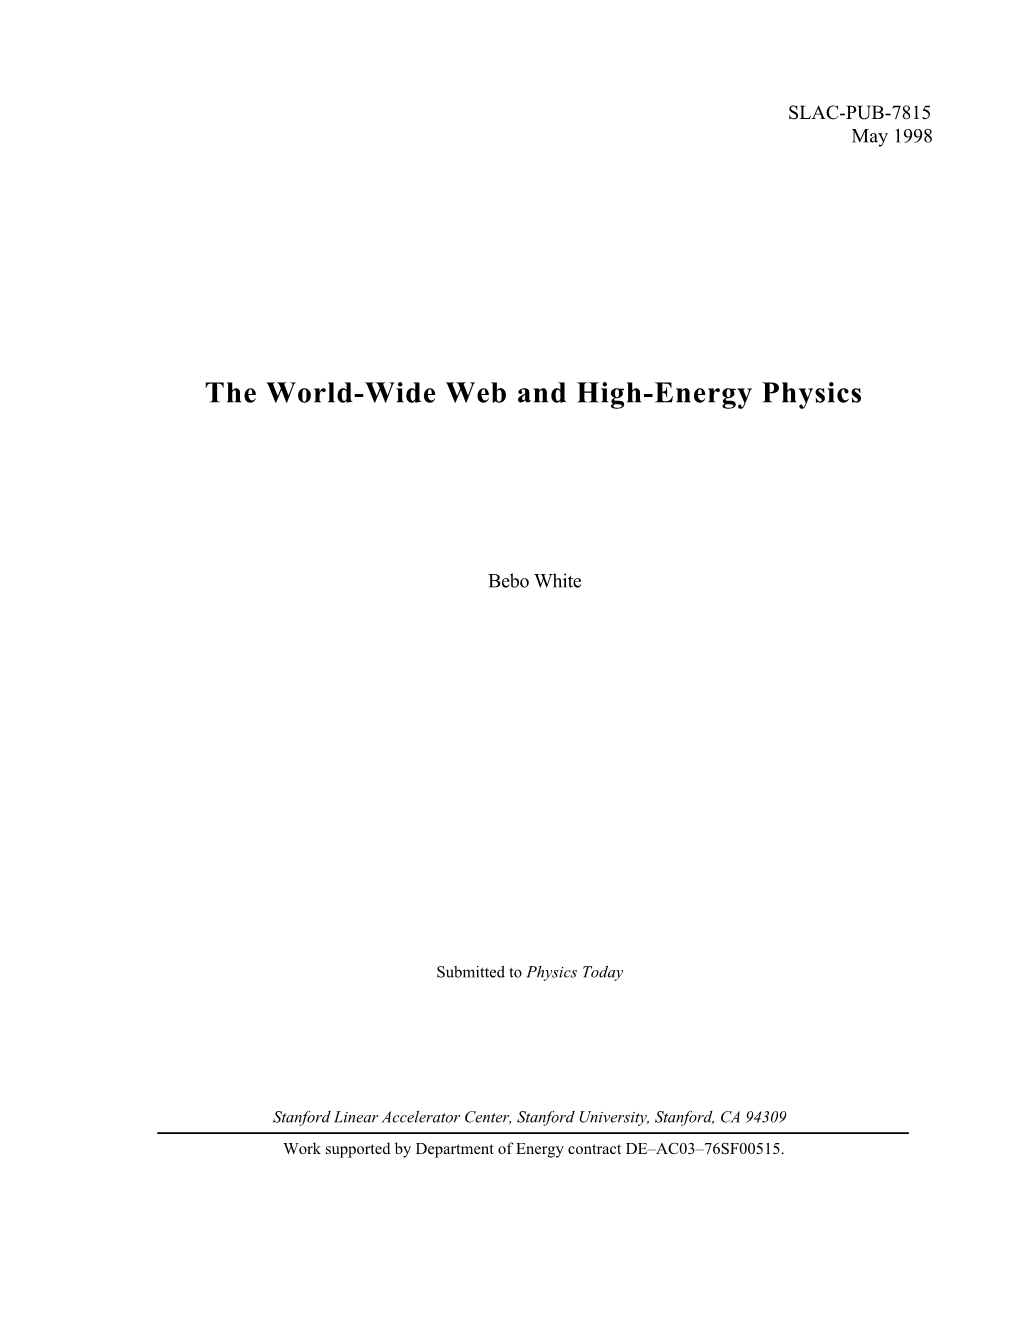 The World-Wide Web and High-Energy Physics